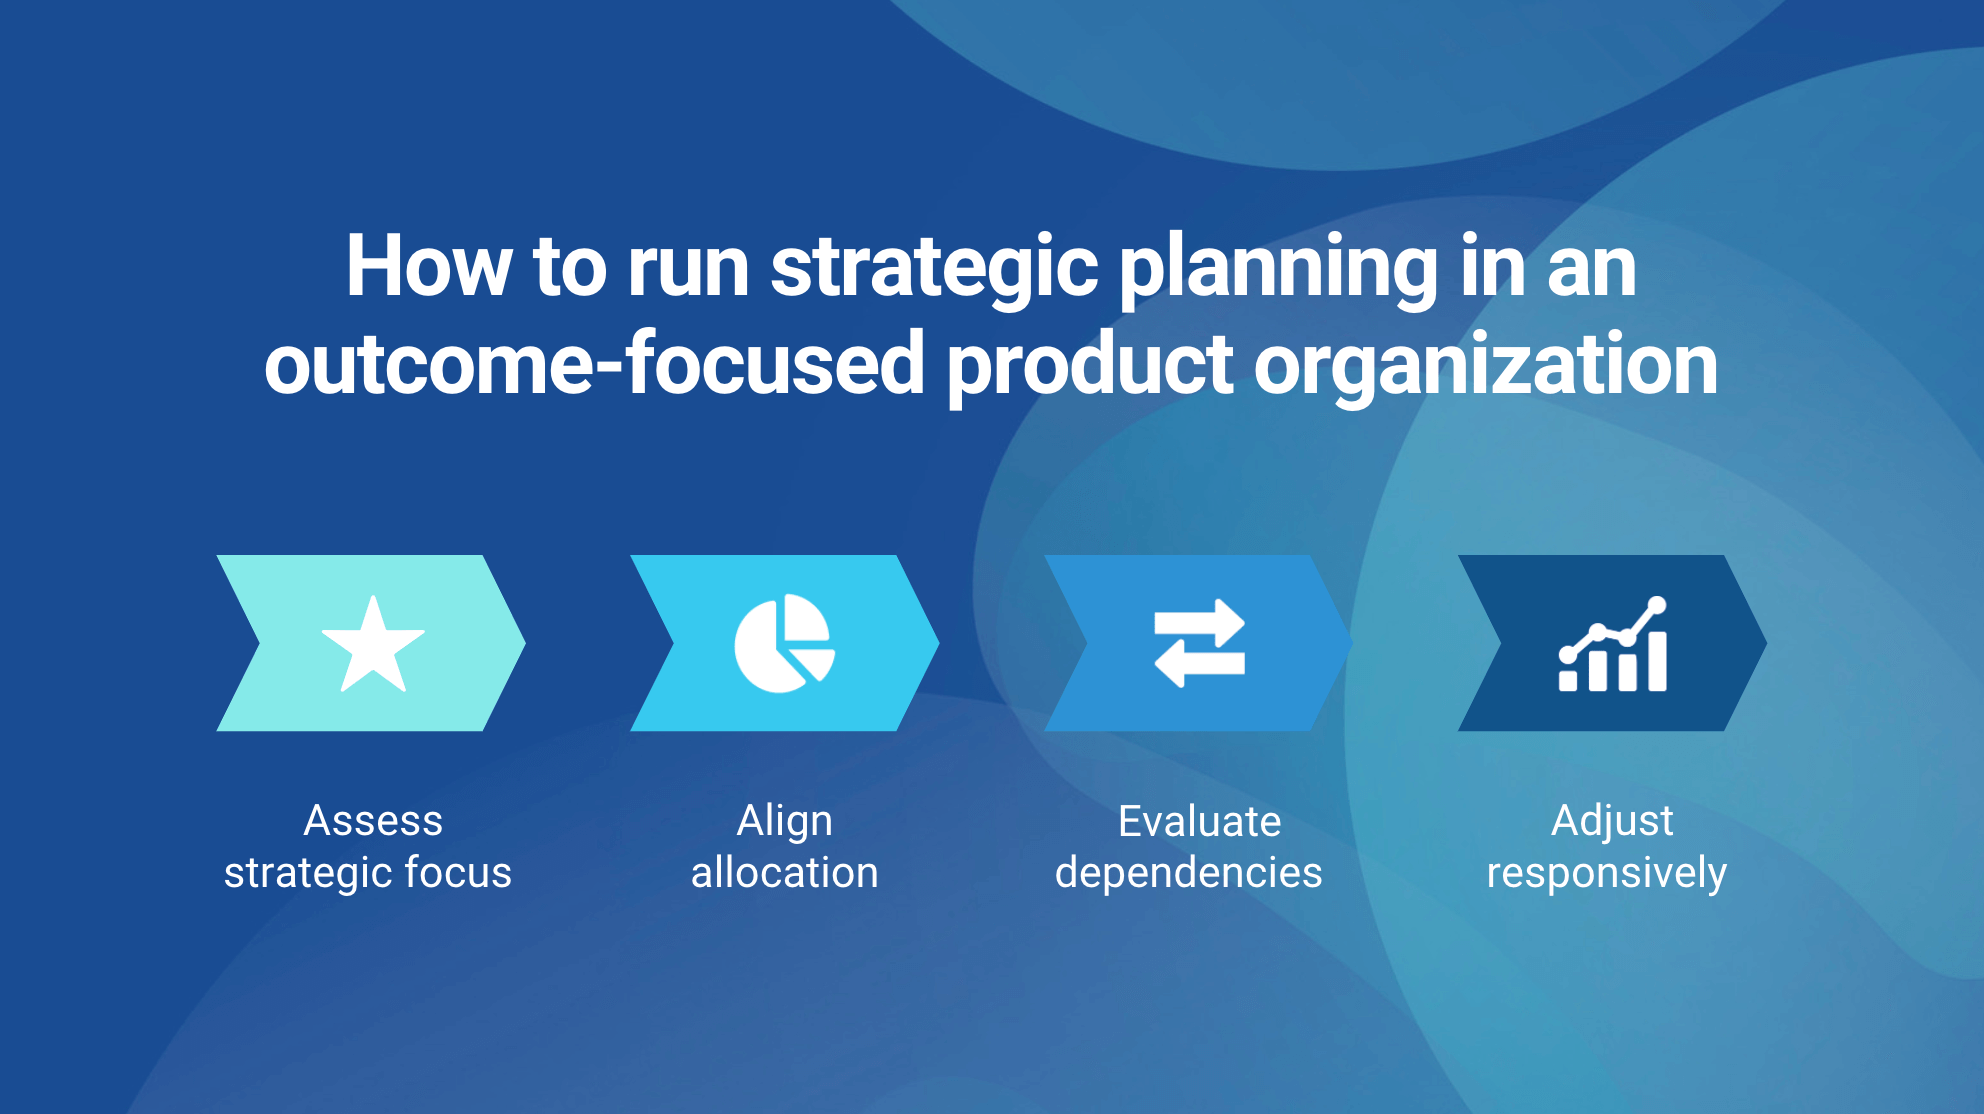 How to Run Outcome-Focused Strategic Planning